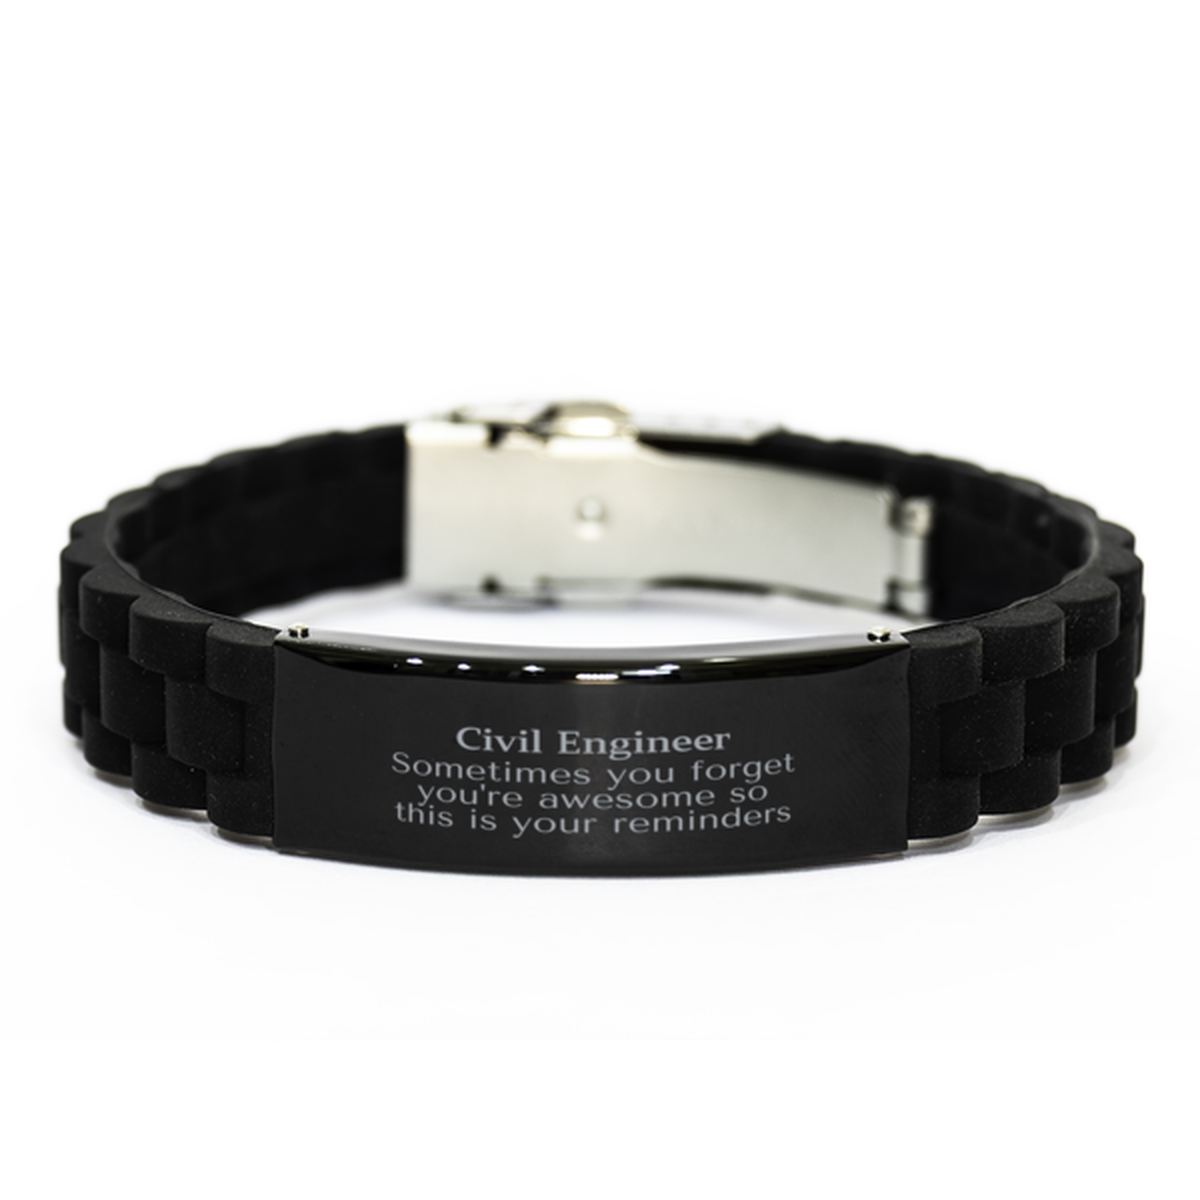 Sentimental Civil Engineer Black Glidelock Clasp Bracelet, Civil Engineer Sometimes you forget you're awesome so this is your reminders, Graduation Christmas Birthday Gifts for Civil Engineer, Men, Women, Coworkers